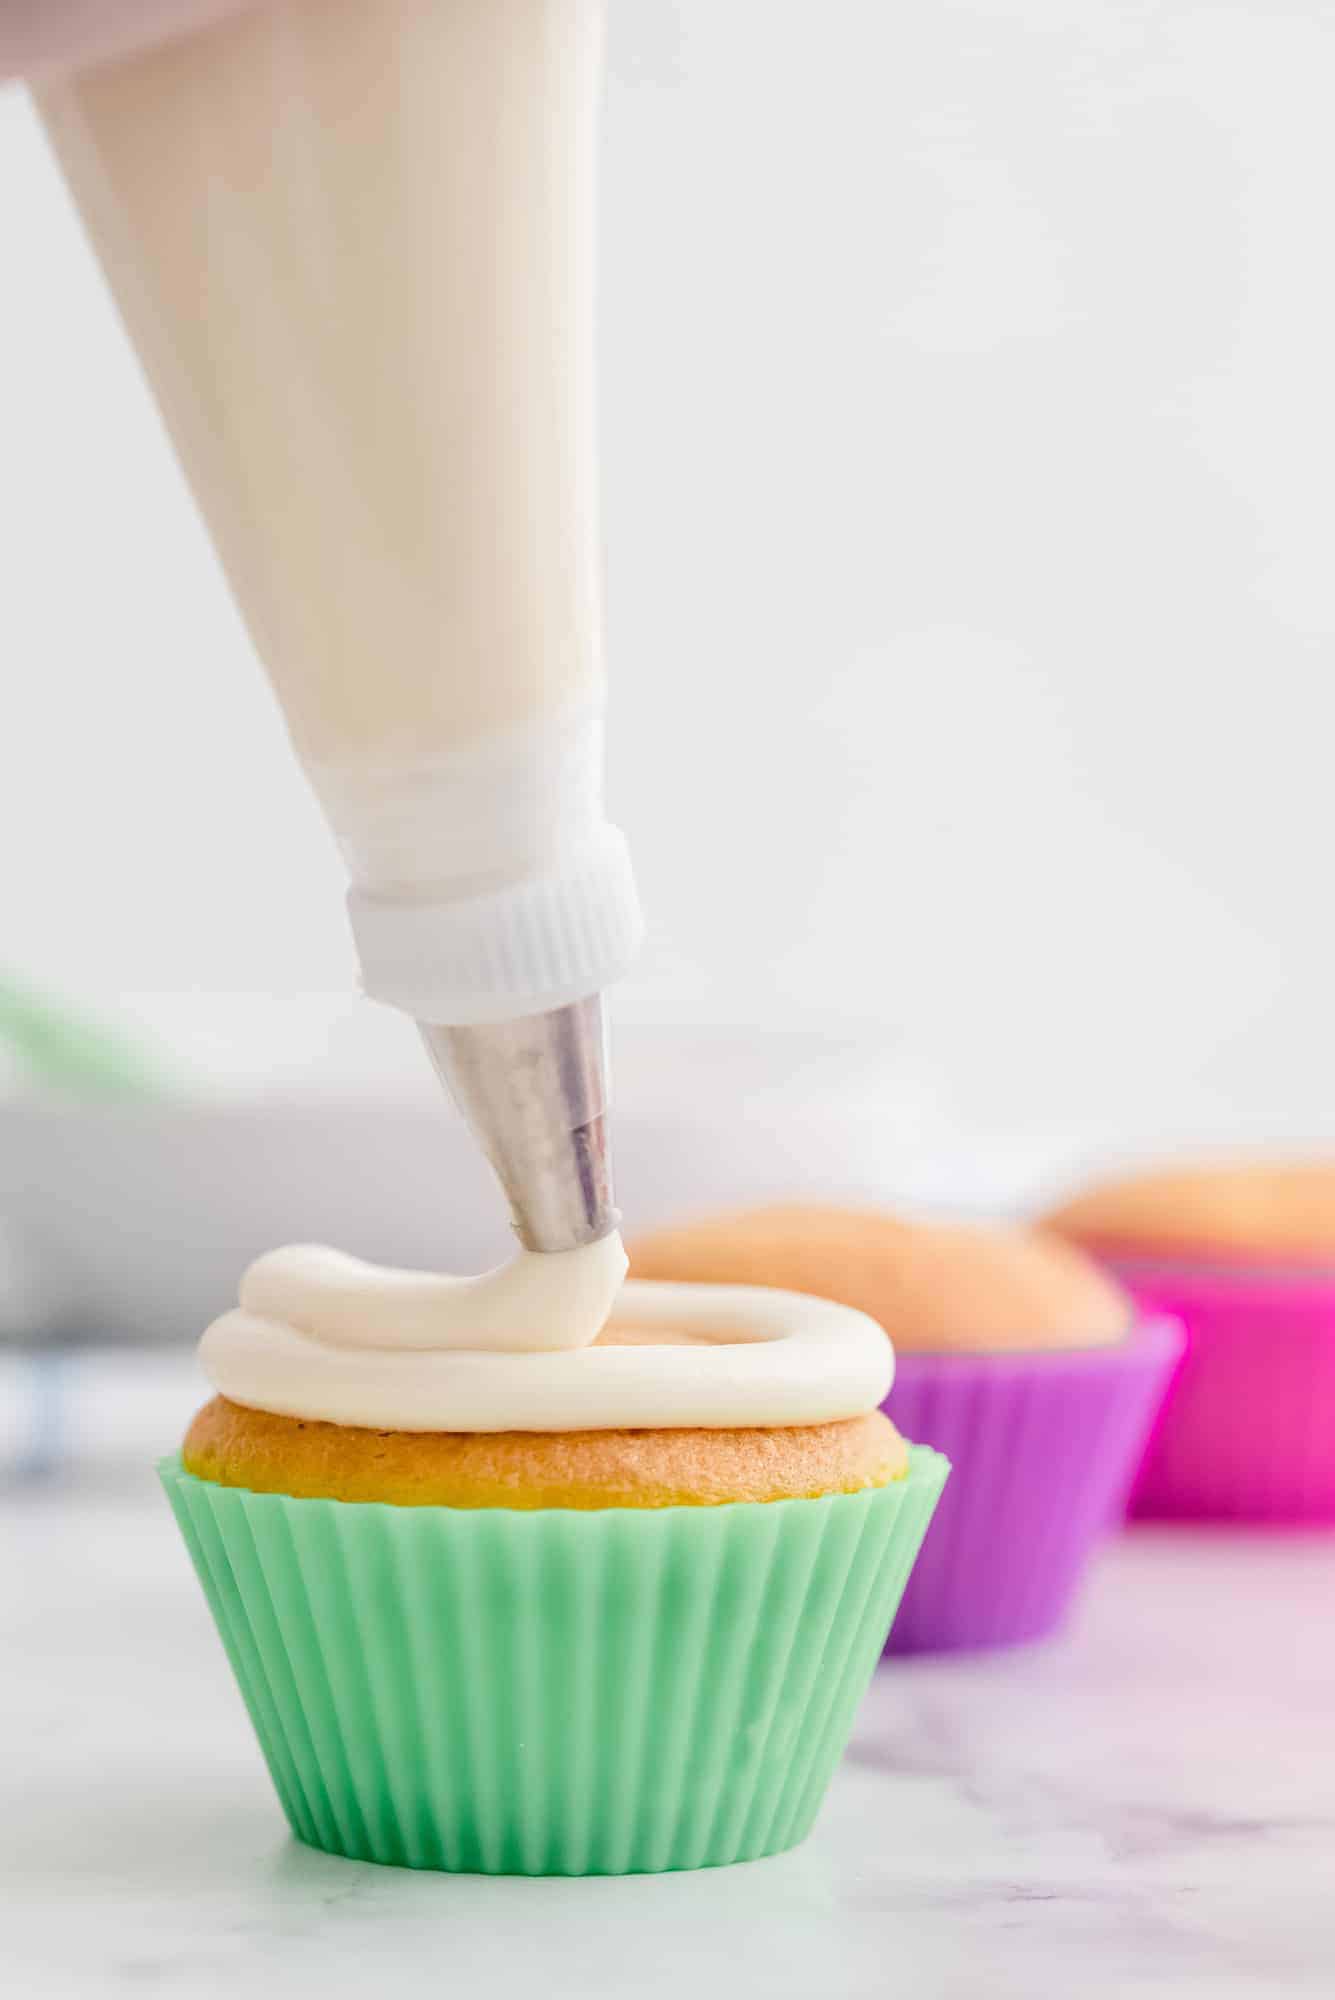 Frosting being piped onto cupcakes.